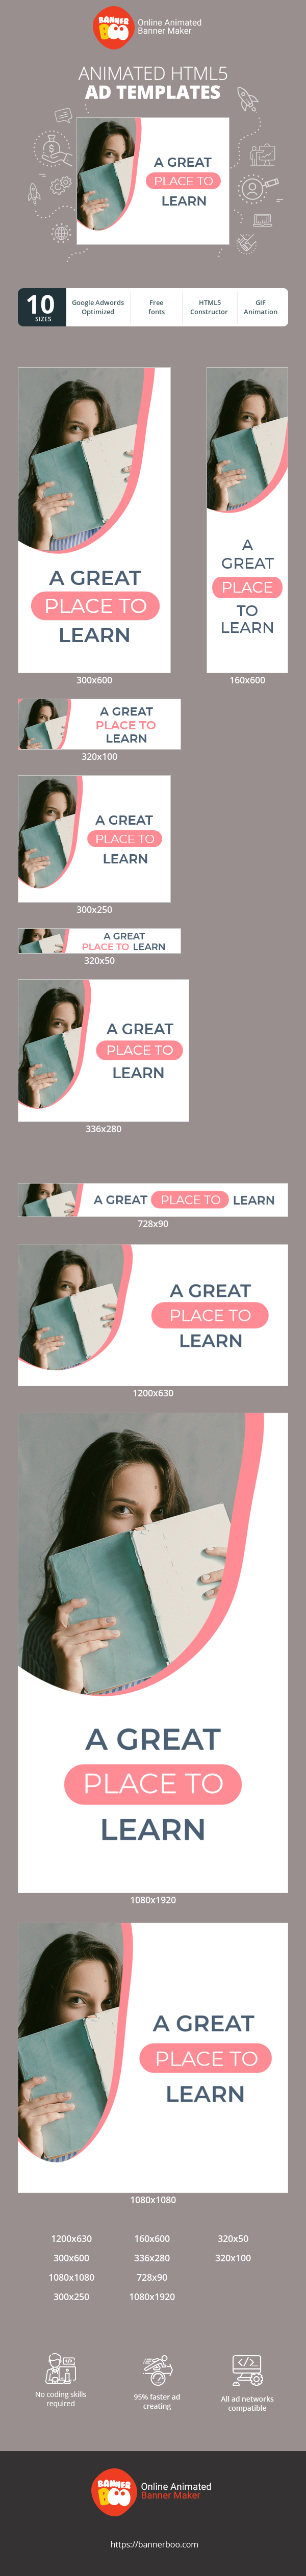 Banner ad template — A Great Place To Learn — 100 Courses For Free